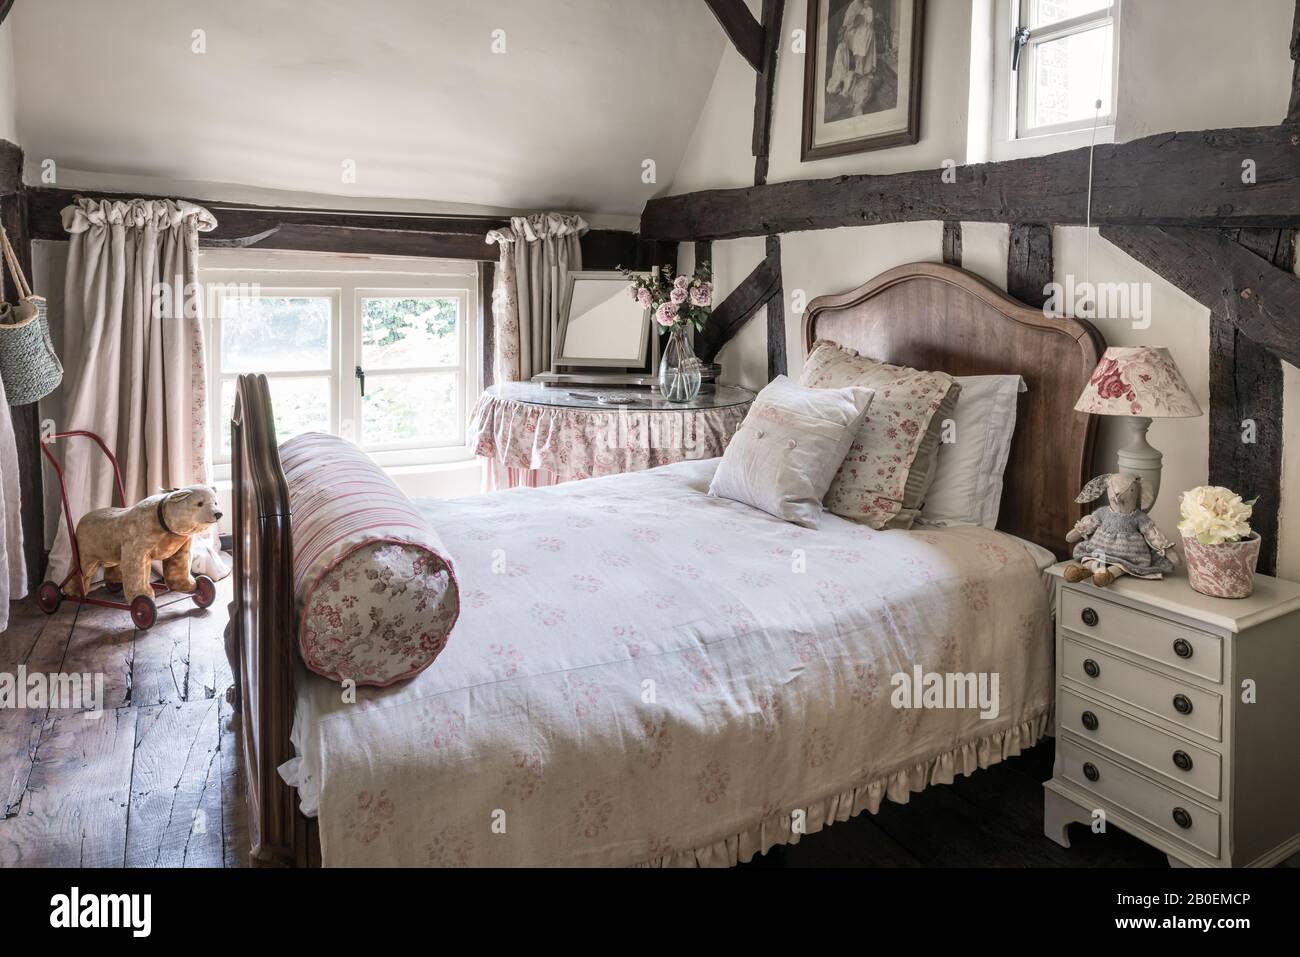 Vintage fabrics in room with antique French bed and original wooden floorboards and beams Stock Photo